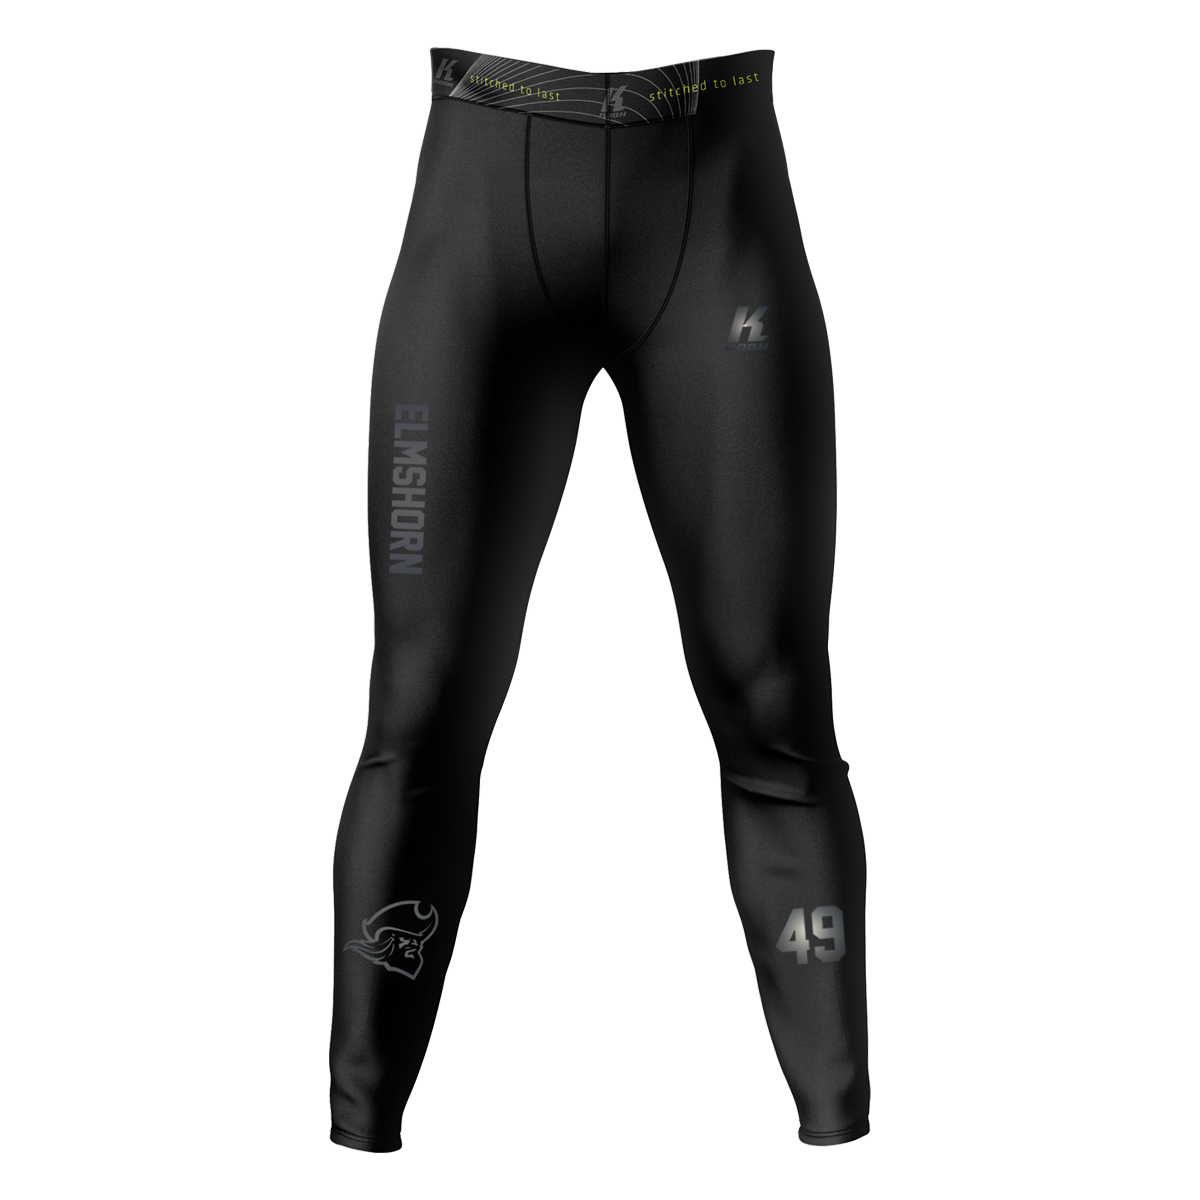 Fighting Pirates "Blackline" K.Tech Fiber Compression Pant BA0514 with Playernumber/Initials